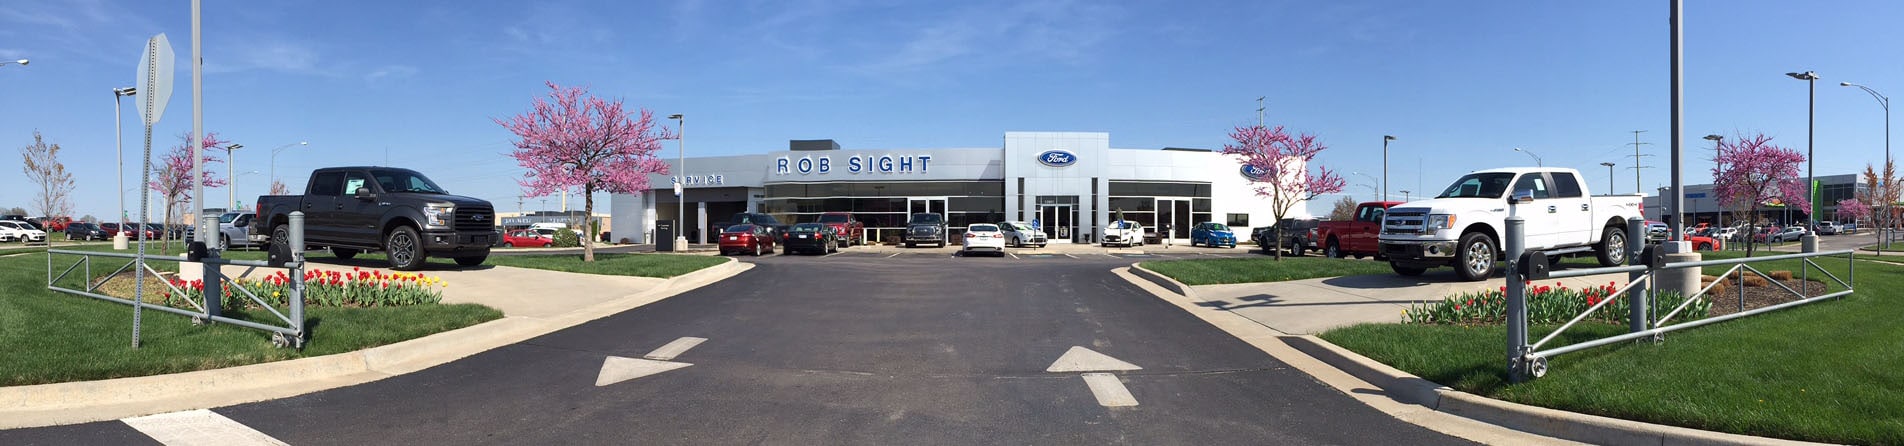 About Rob Sight Ford | New Ford and Used Car Dealer ...